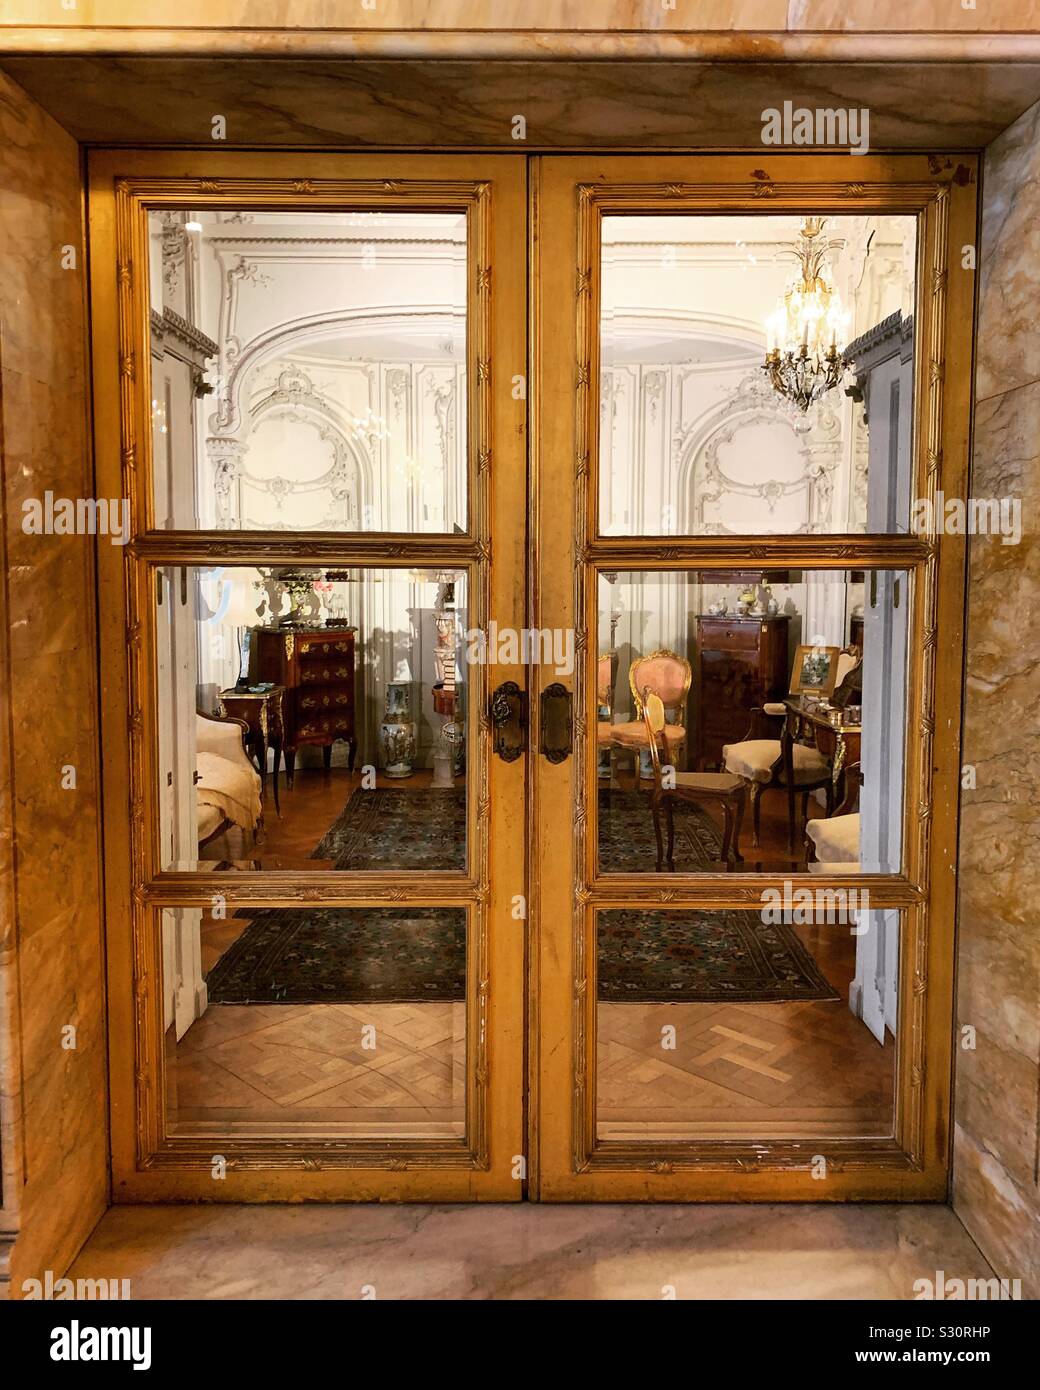 Looking Through Interior Doors Towards A Room At Marble